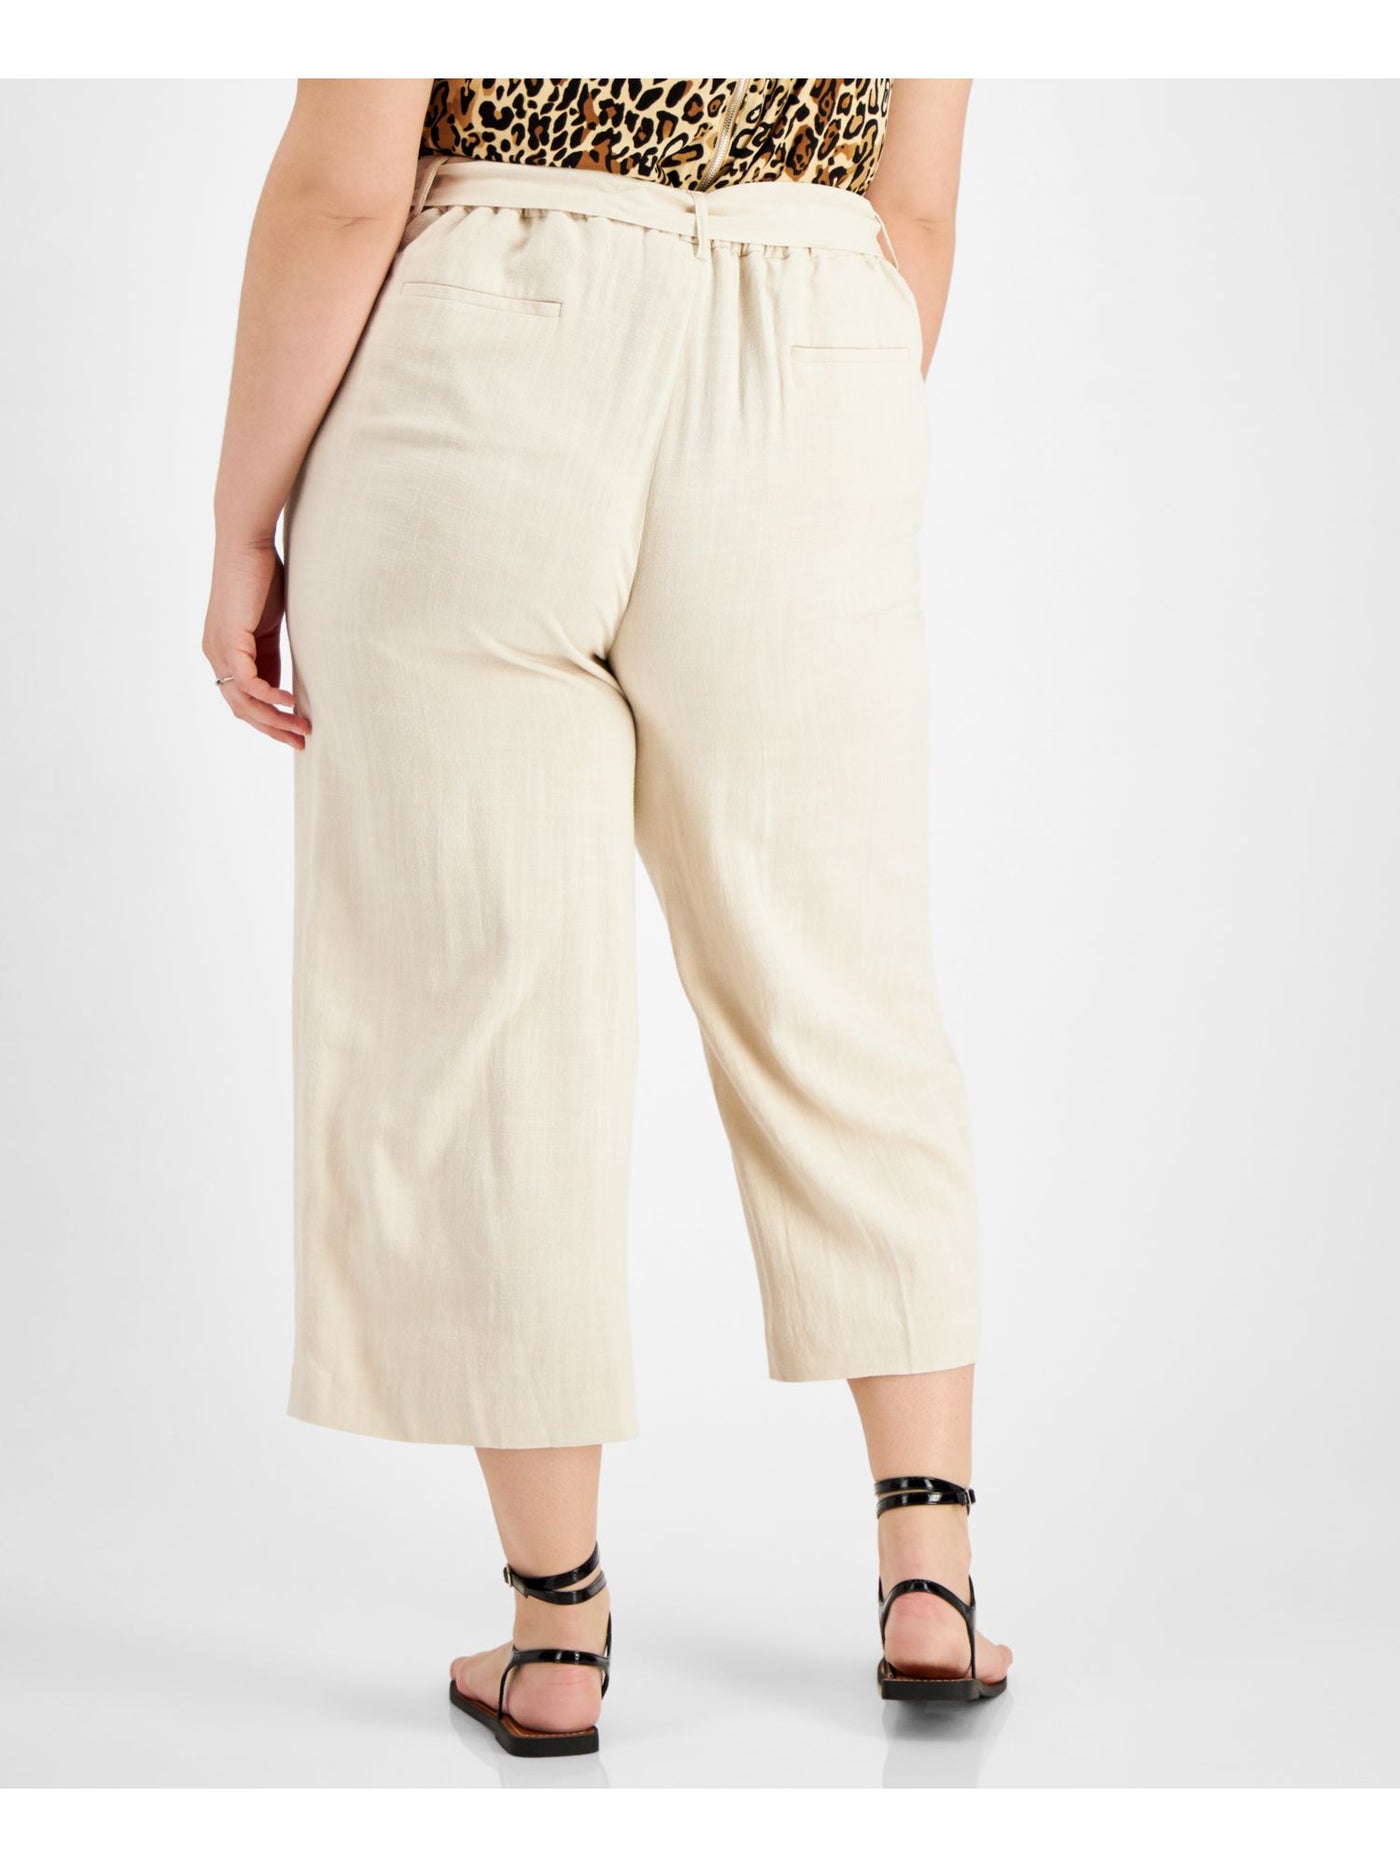 BAR III Womens Beige Pocketed Belted Straight Cropped High Waist Pants Plus 18W